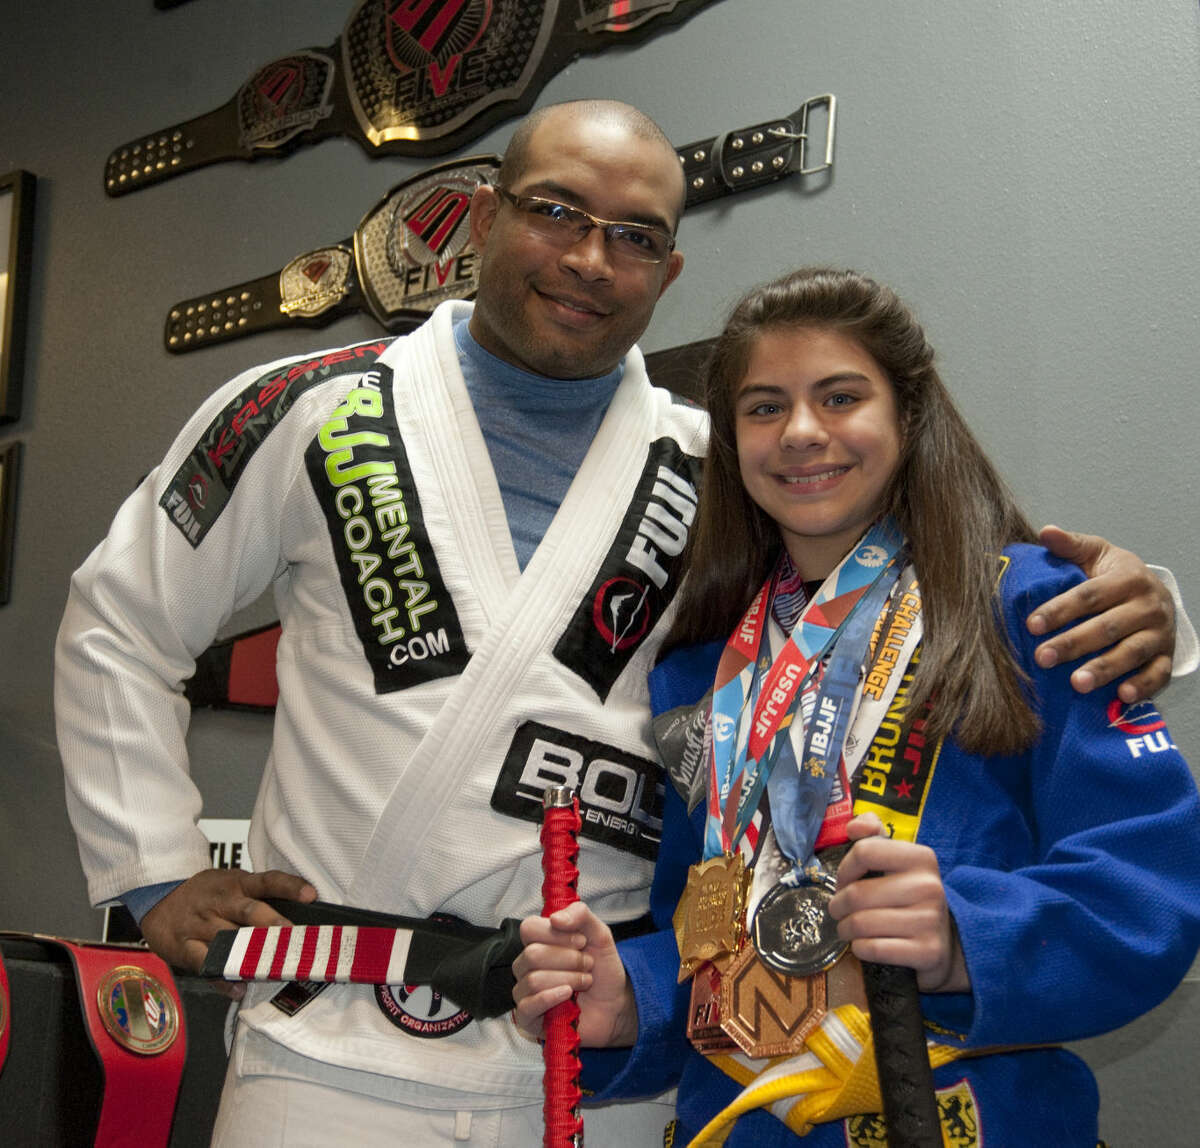 Our athlete Emily will be fighting in the World Master IBJJF Jiu